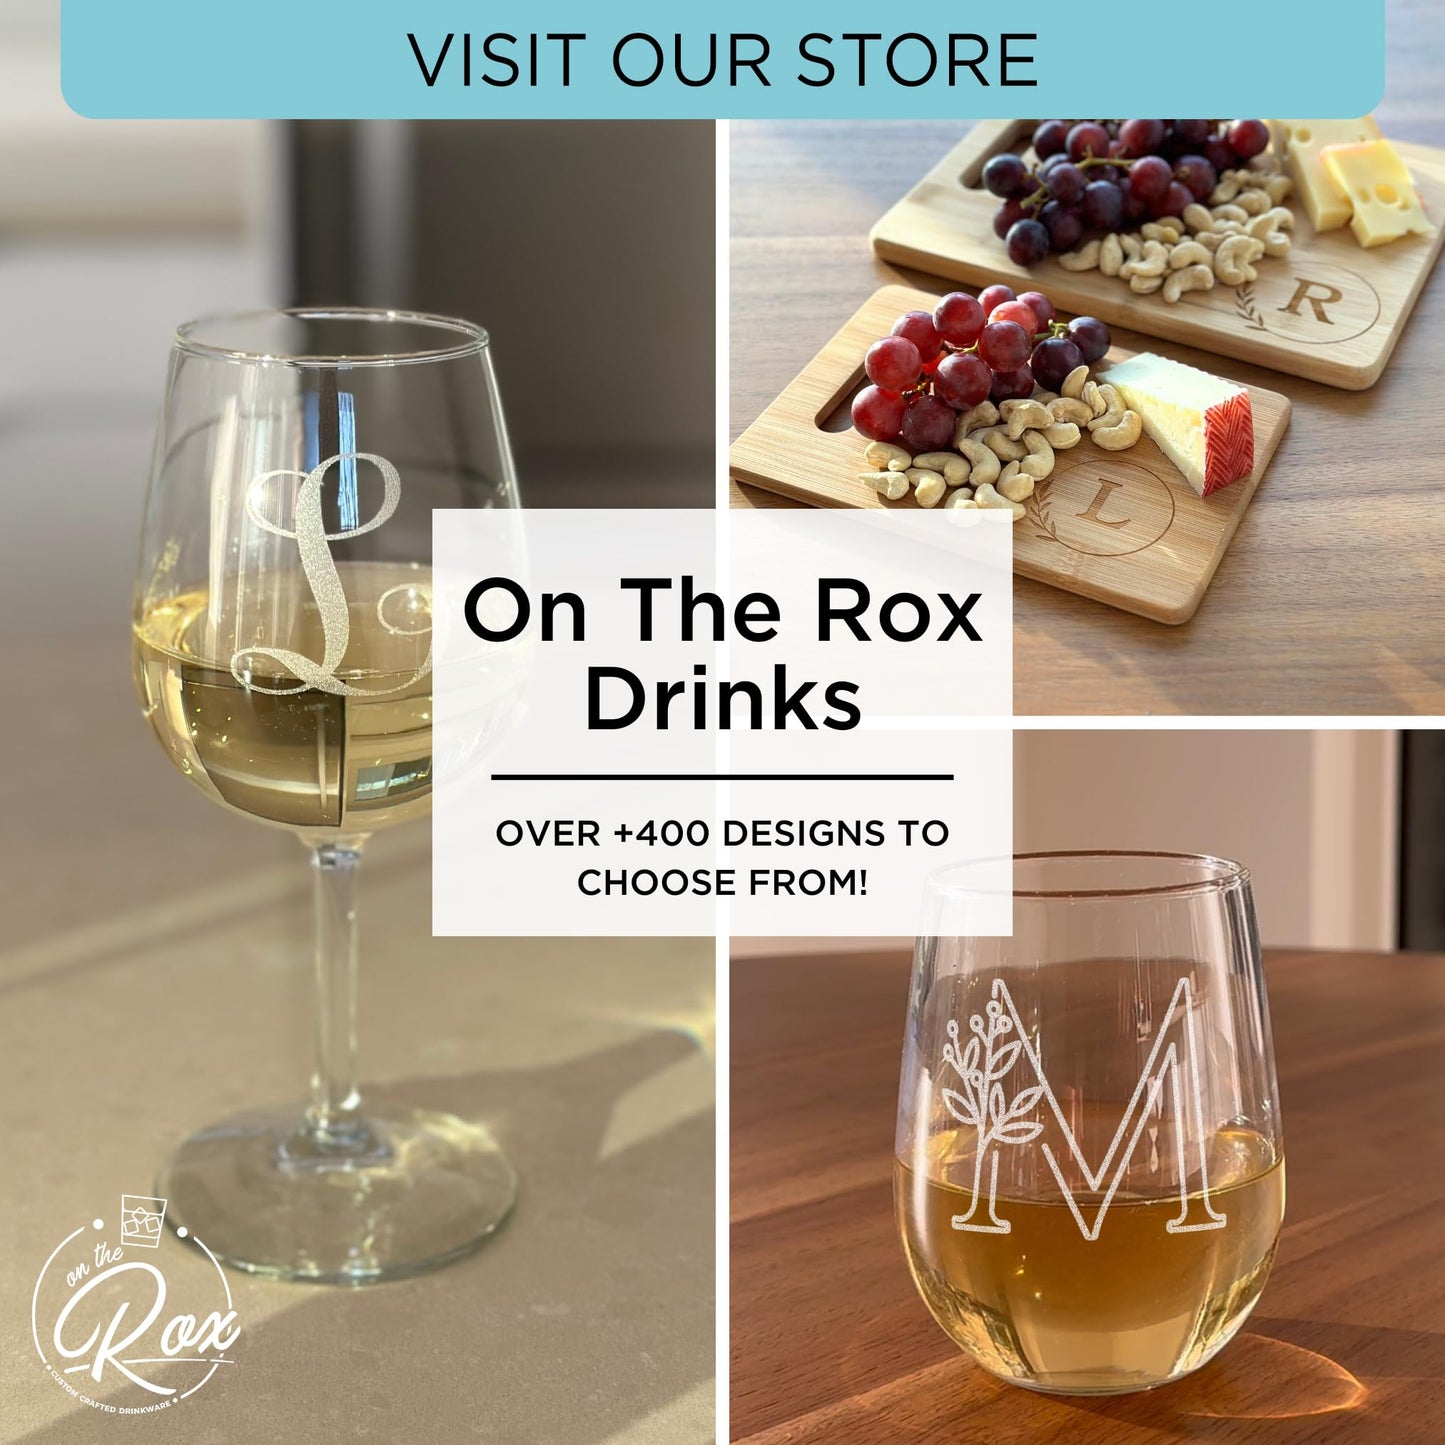 On The Rox Drinks Dachshund Gifts for Dog Lovers - I Love Wieners Stemless Dog Wine Glass Set of 2- Funny Cup, Tumbler, Stuff for Pet-Loving Mom, Grandma - Weenie Dog Gifts For Women